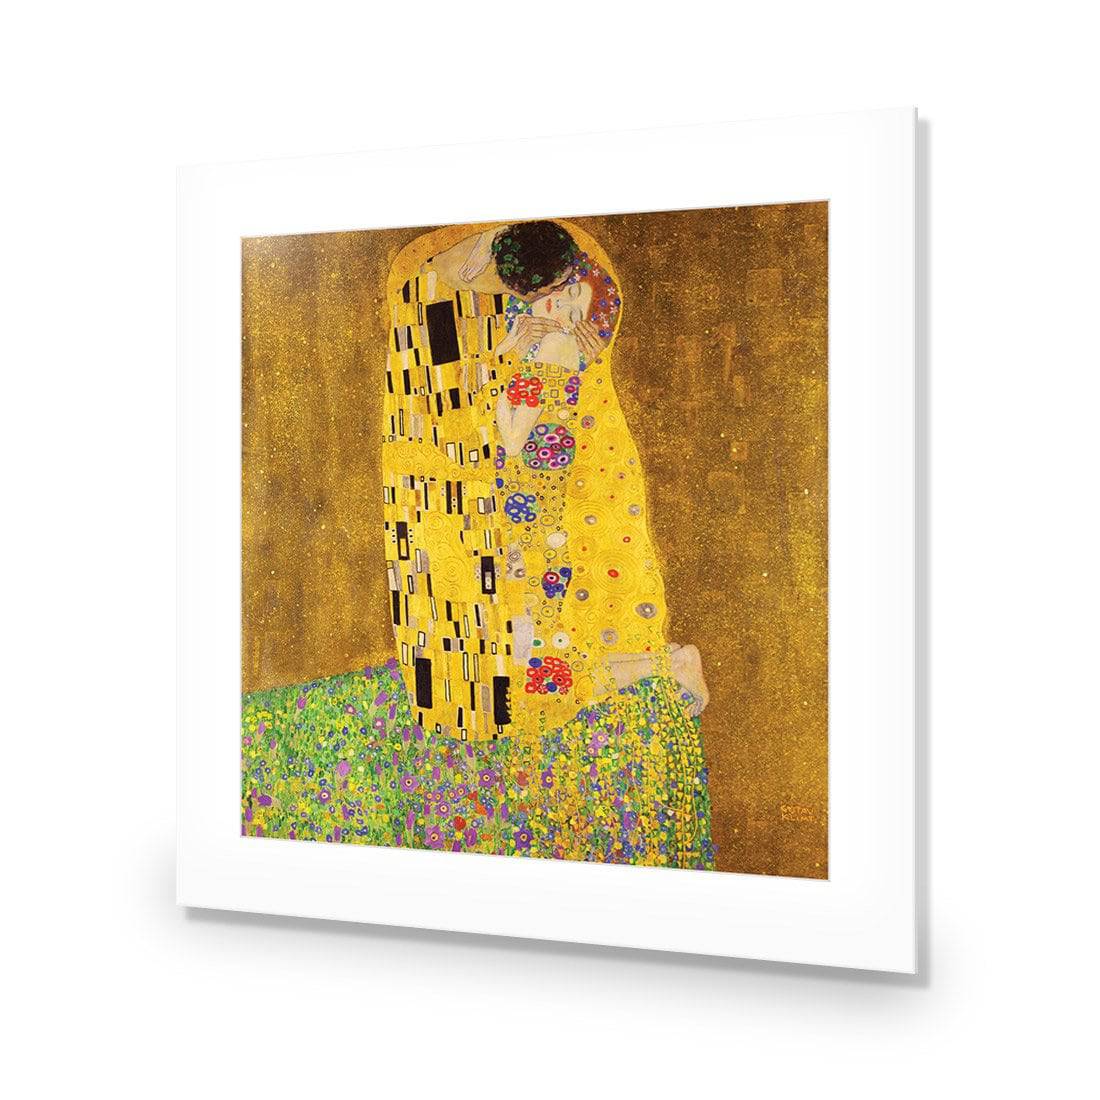 The Kiss, Square-Acrylic-Wall Art Design-With Border-Acrylic - No Frame-37x37cm-Wall Art Designs